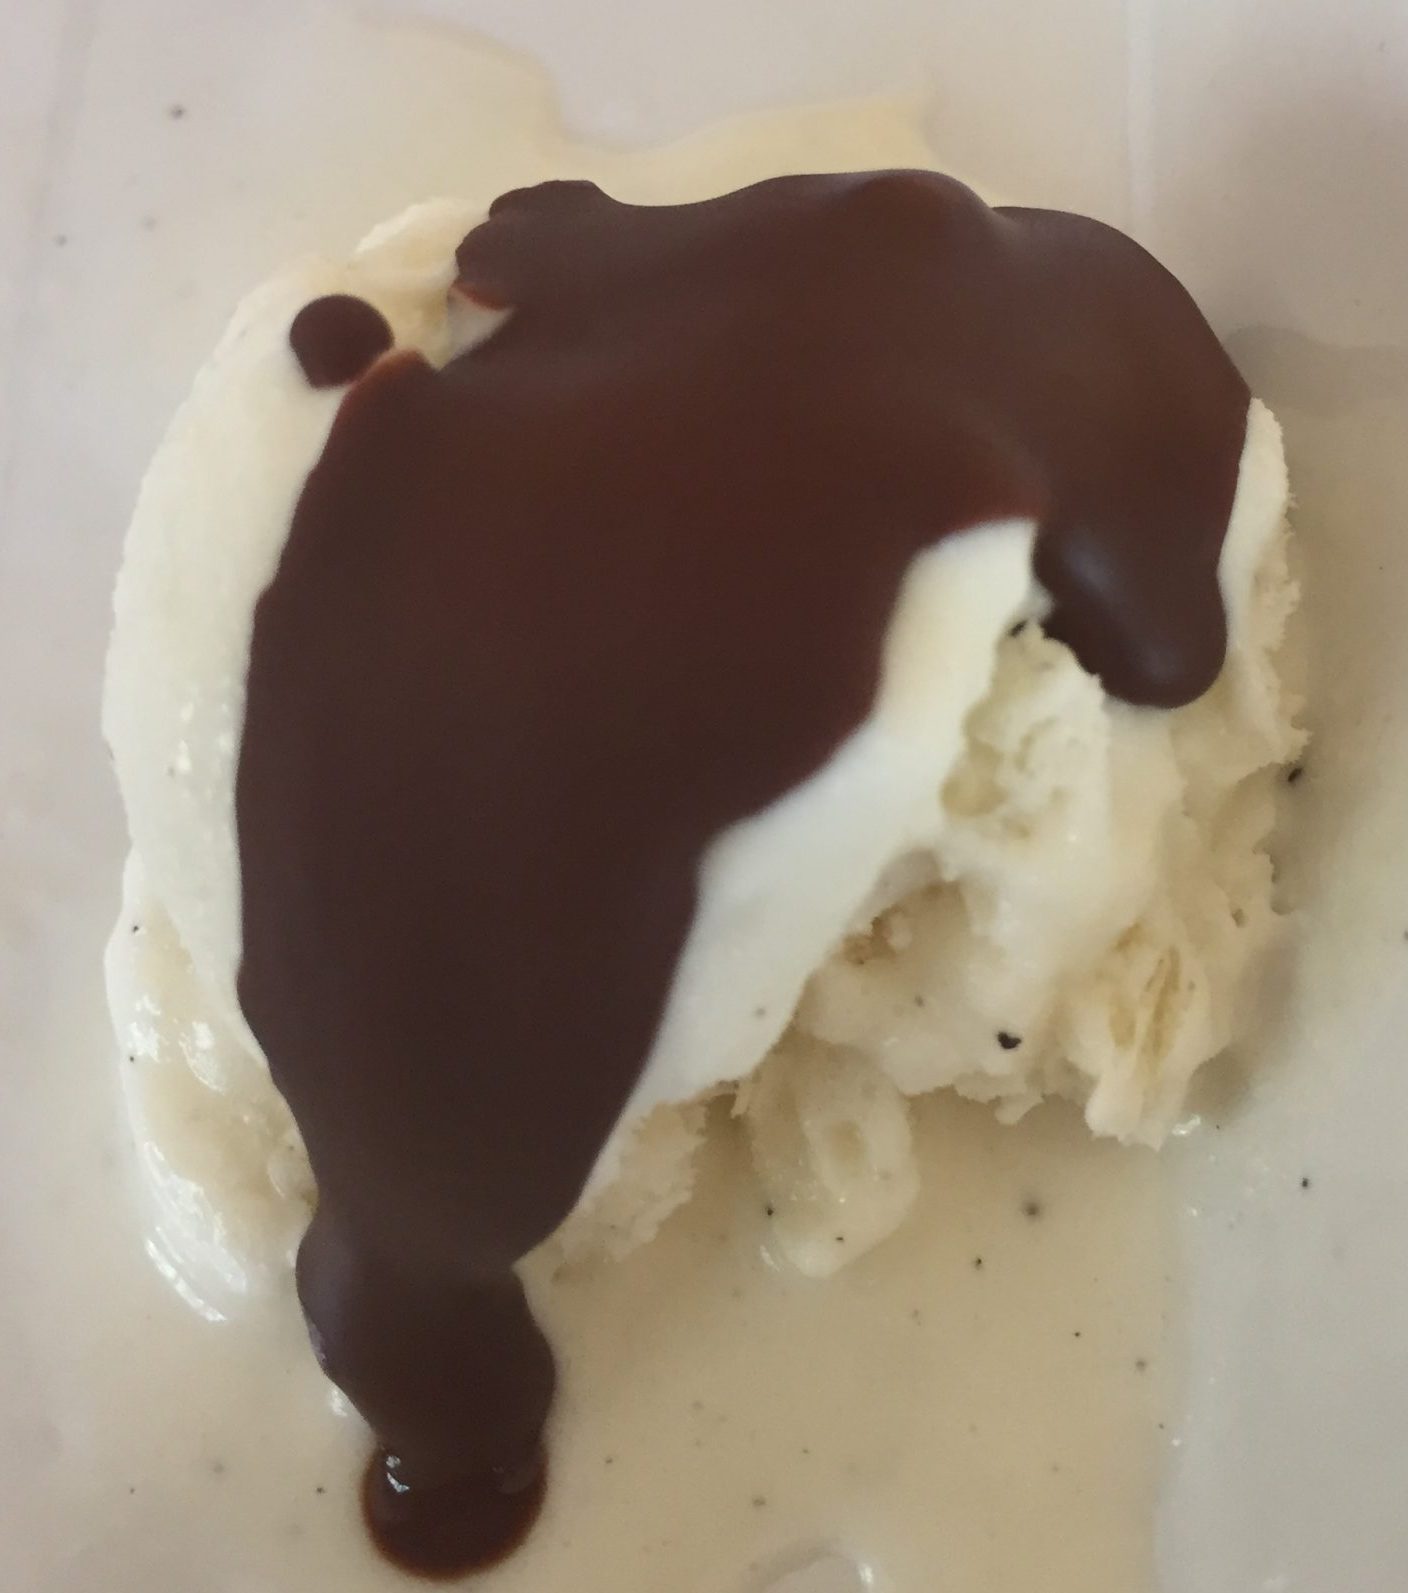 Melted chocolate with coconut oil forms a solid shell